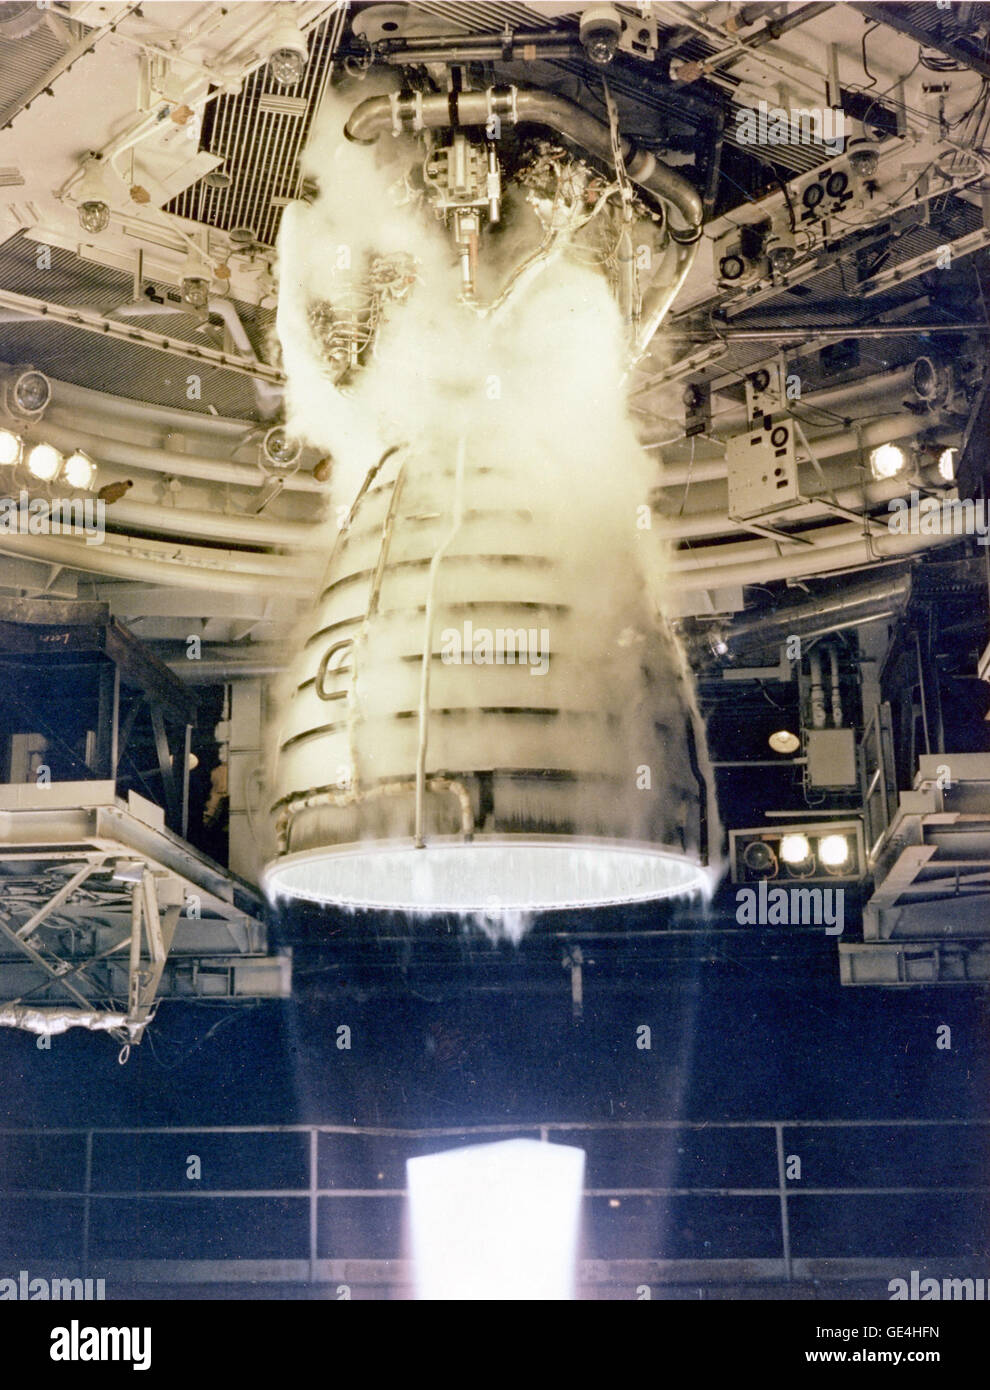 A Space Shuttle Main Engine (SSME) undergoing a full power level 290.04 second test firing at the National Space Technology Laboratories (currently called the Stennis Space Center) in Mississippi. The firings were part of a series of developmental testing designed to increase the amount of thrust available to the Shuttle from its three main engines. The additional thrust allowed the Shuttle to launch heavier payloads into orbit. The Marshall Space Flight Center (MSFC) had management responsibility of Space Shuttle propulsion elements, including the Main Engines.   Image #: GPN-2000-000055 Date Stock Photo